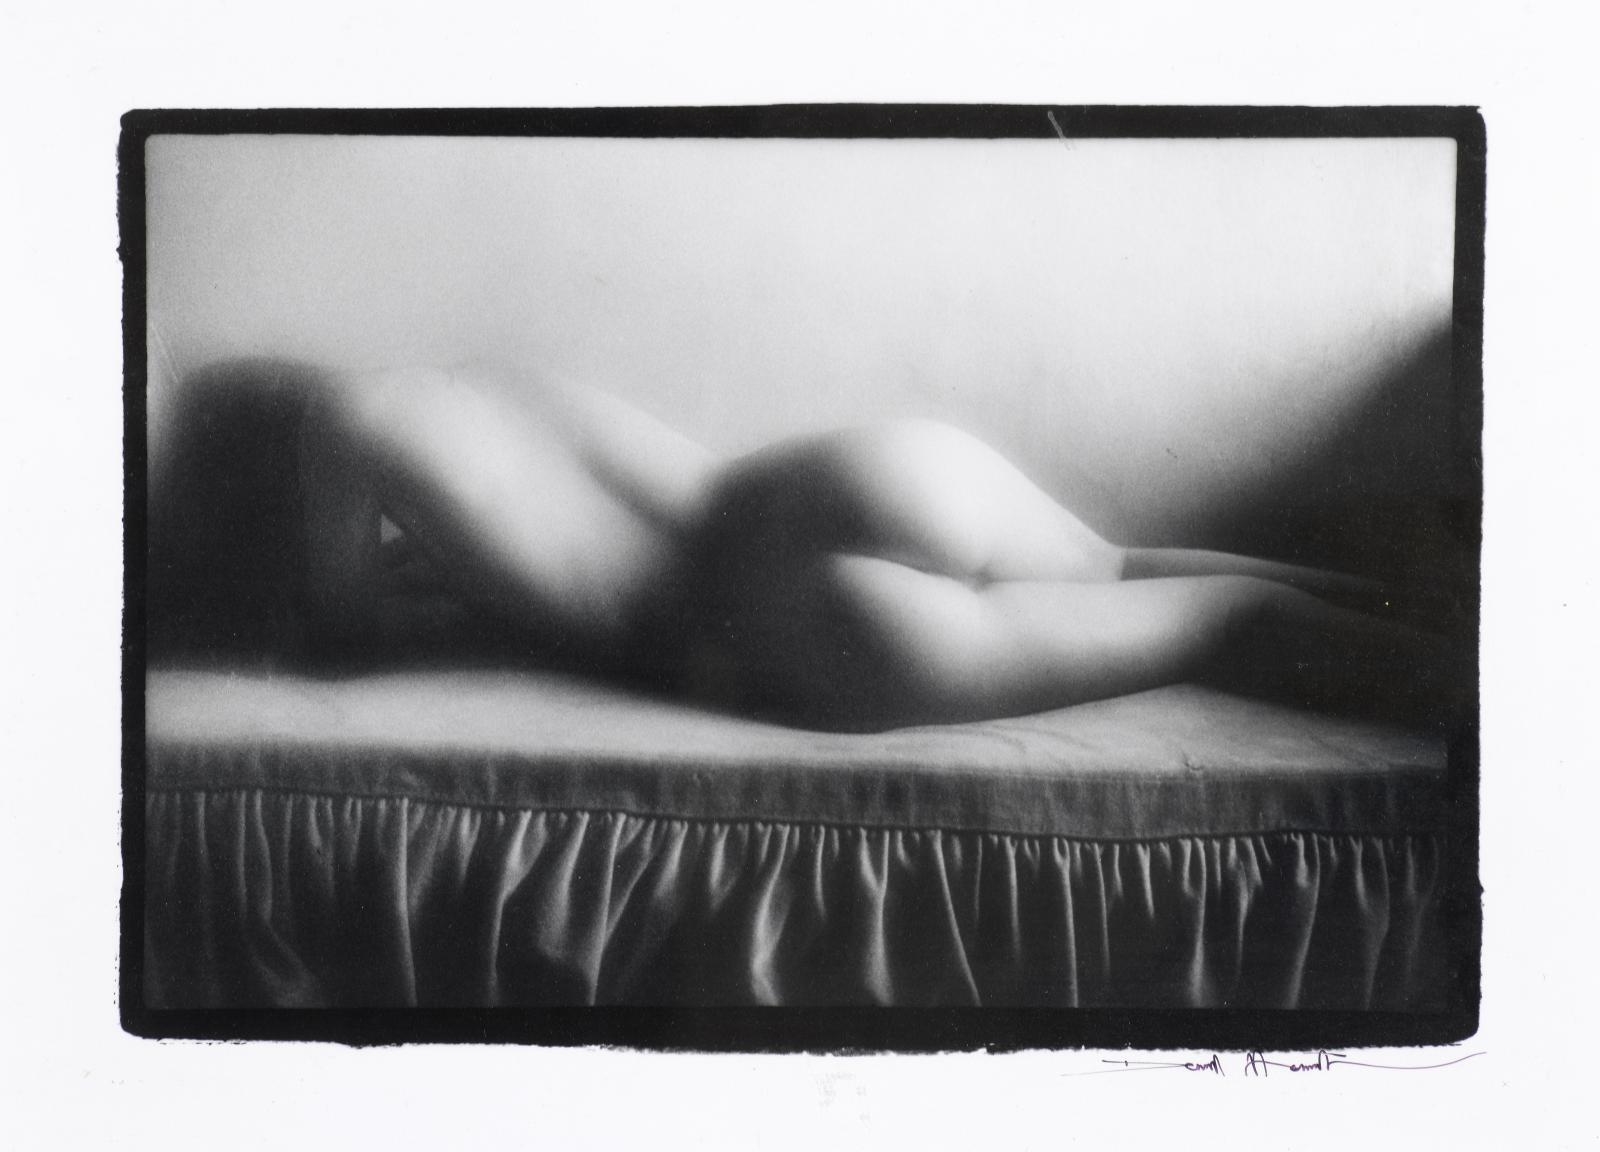 Artwork by David Hamilton, Coated nude, Made of silver print.